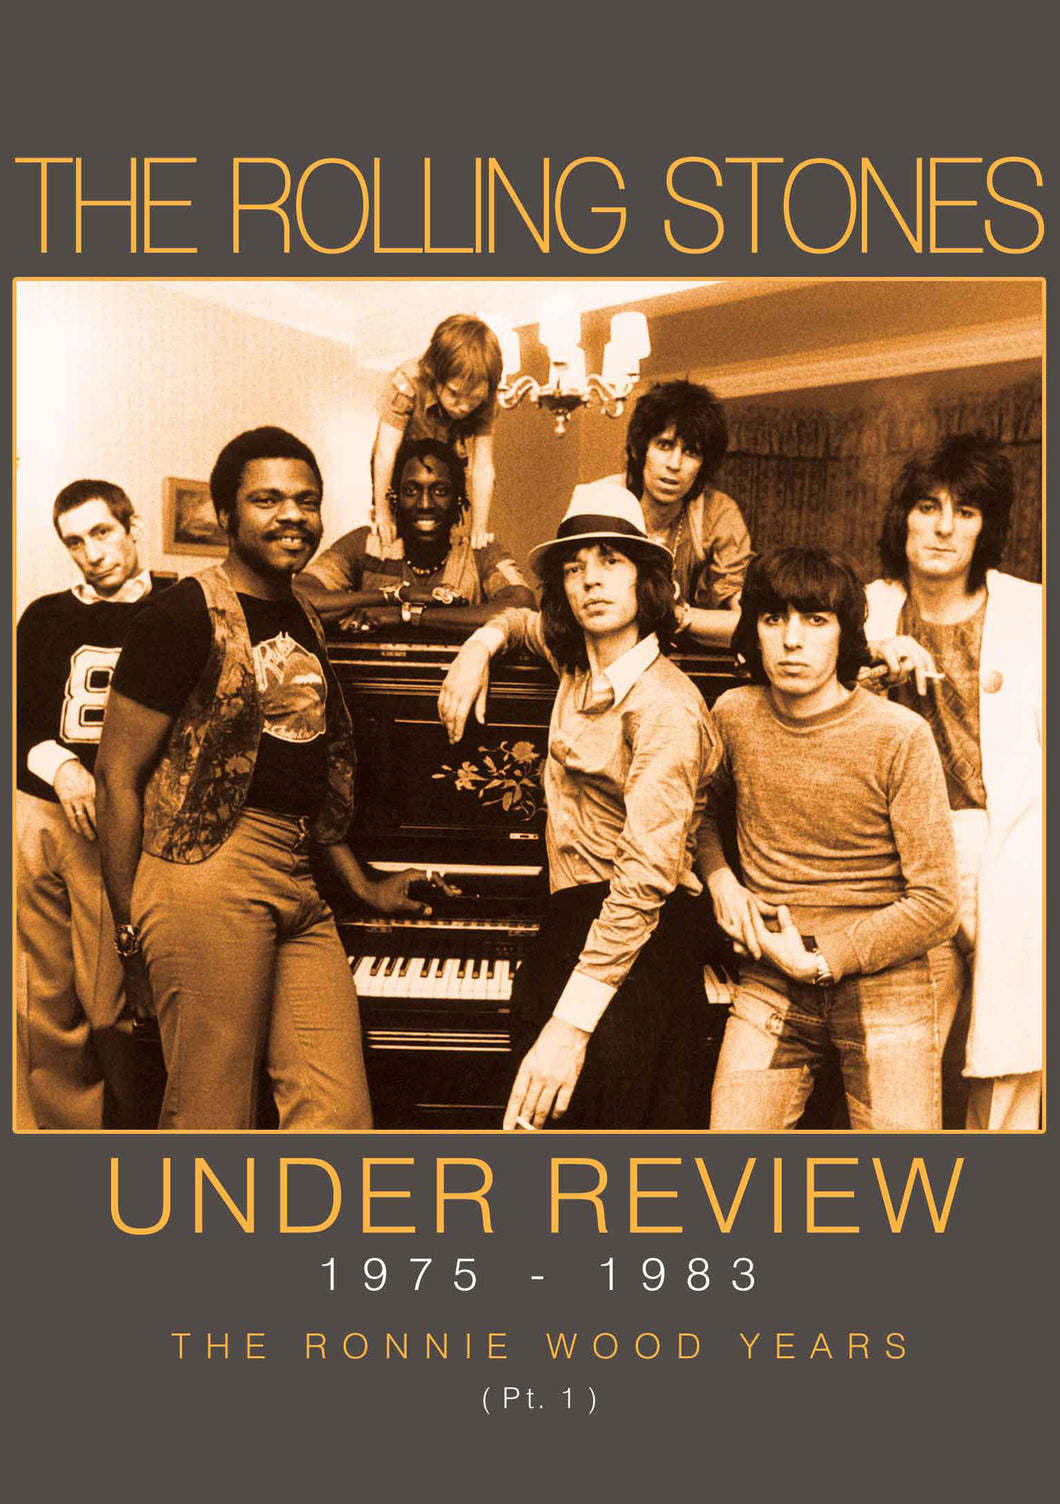 Rolling Stones - Under Review 1975-1983: The Ronnie Wood Years Part 1 (DVD)